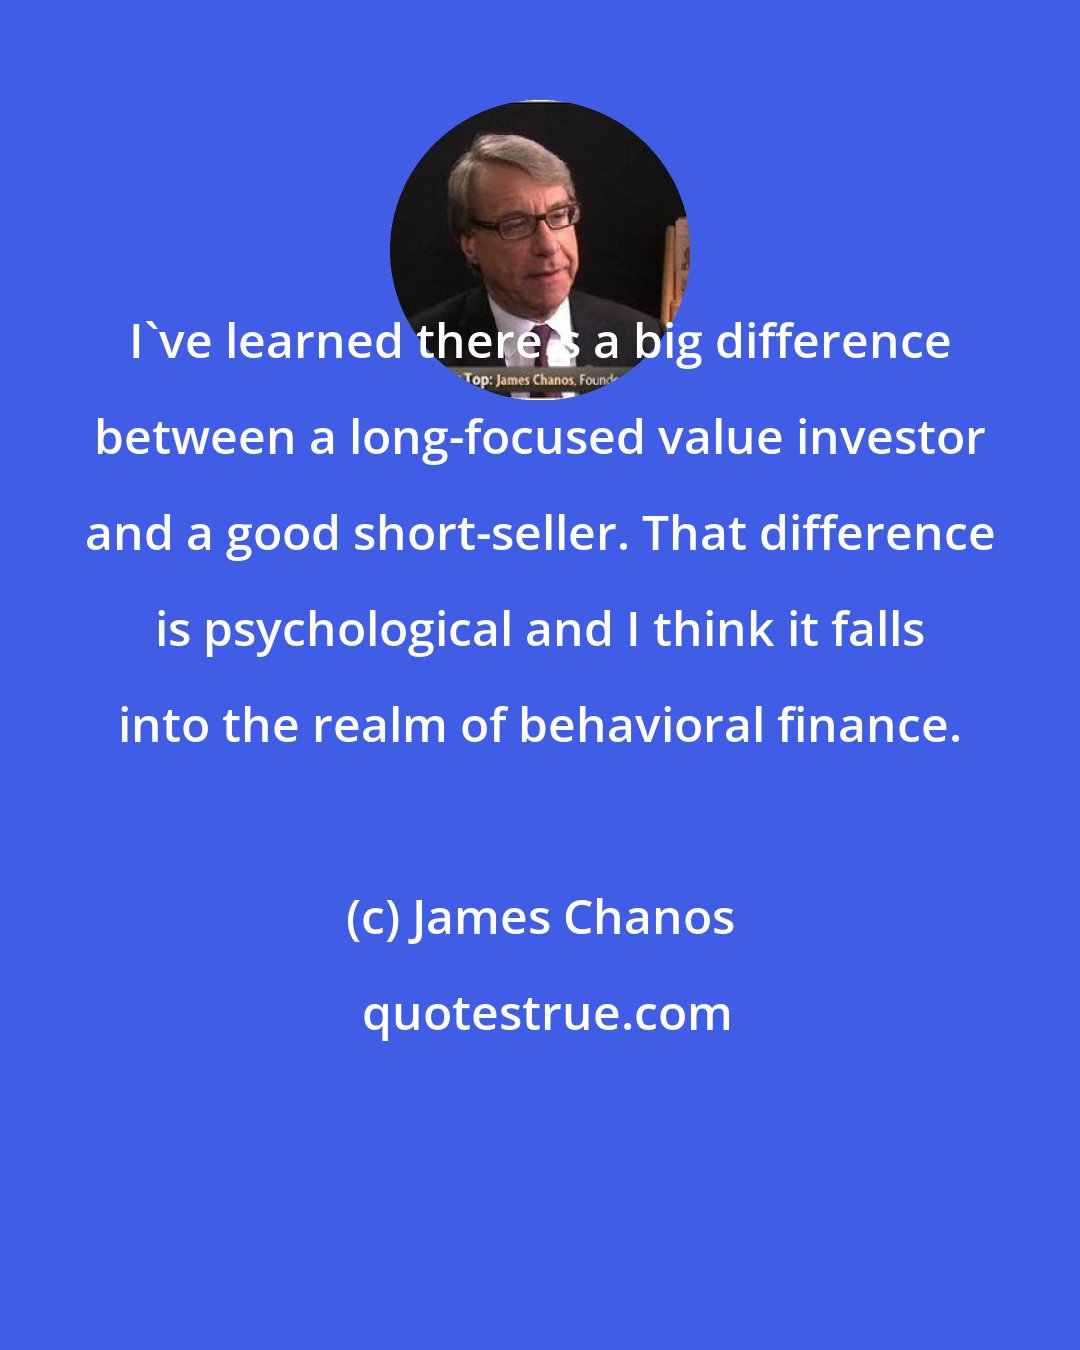 James Chanos: I've learned there's a big difference between a long-focused value investor and a good short-seller. That difference is psychological and I think it falls into the realm of behavioral finance.